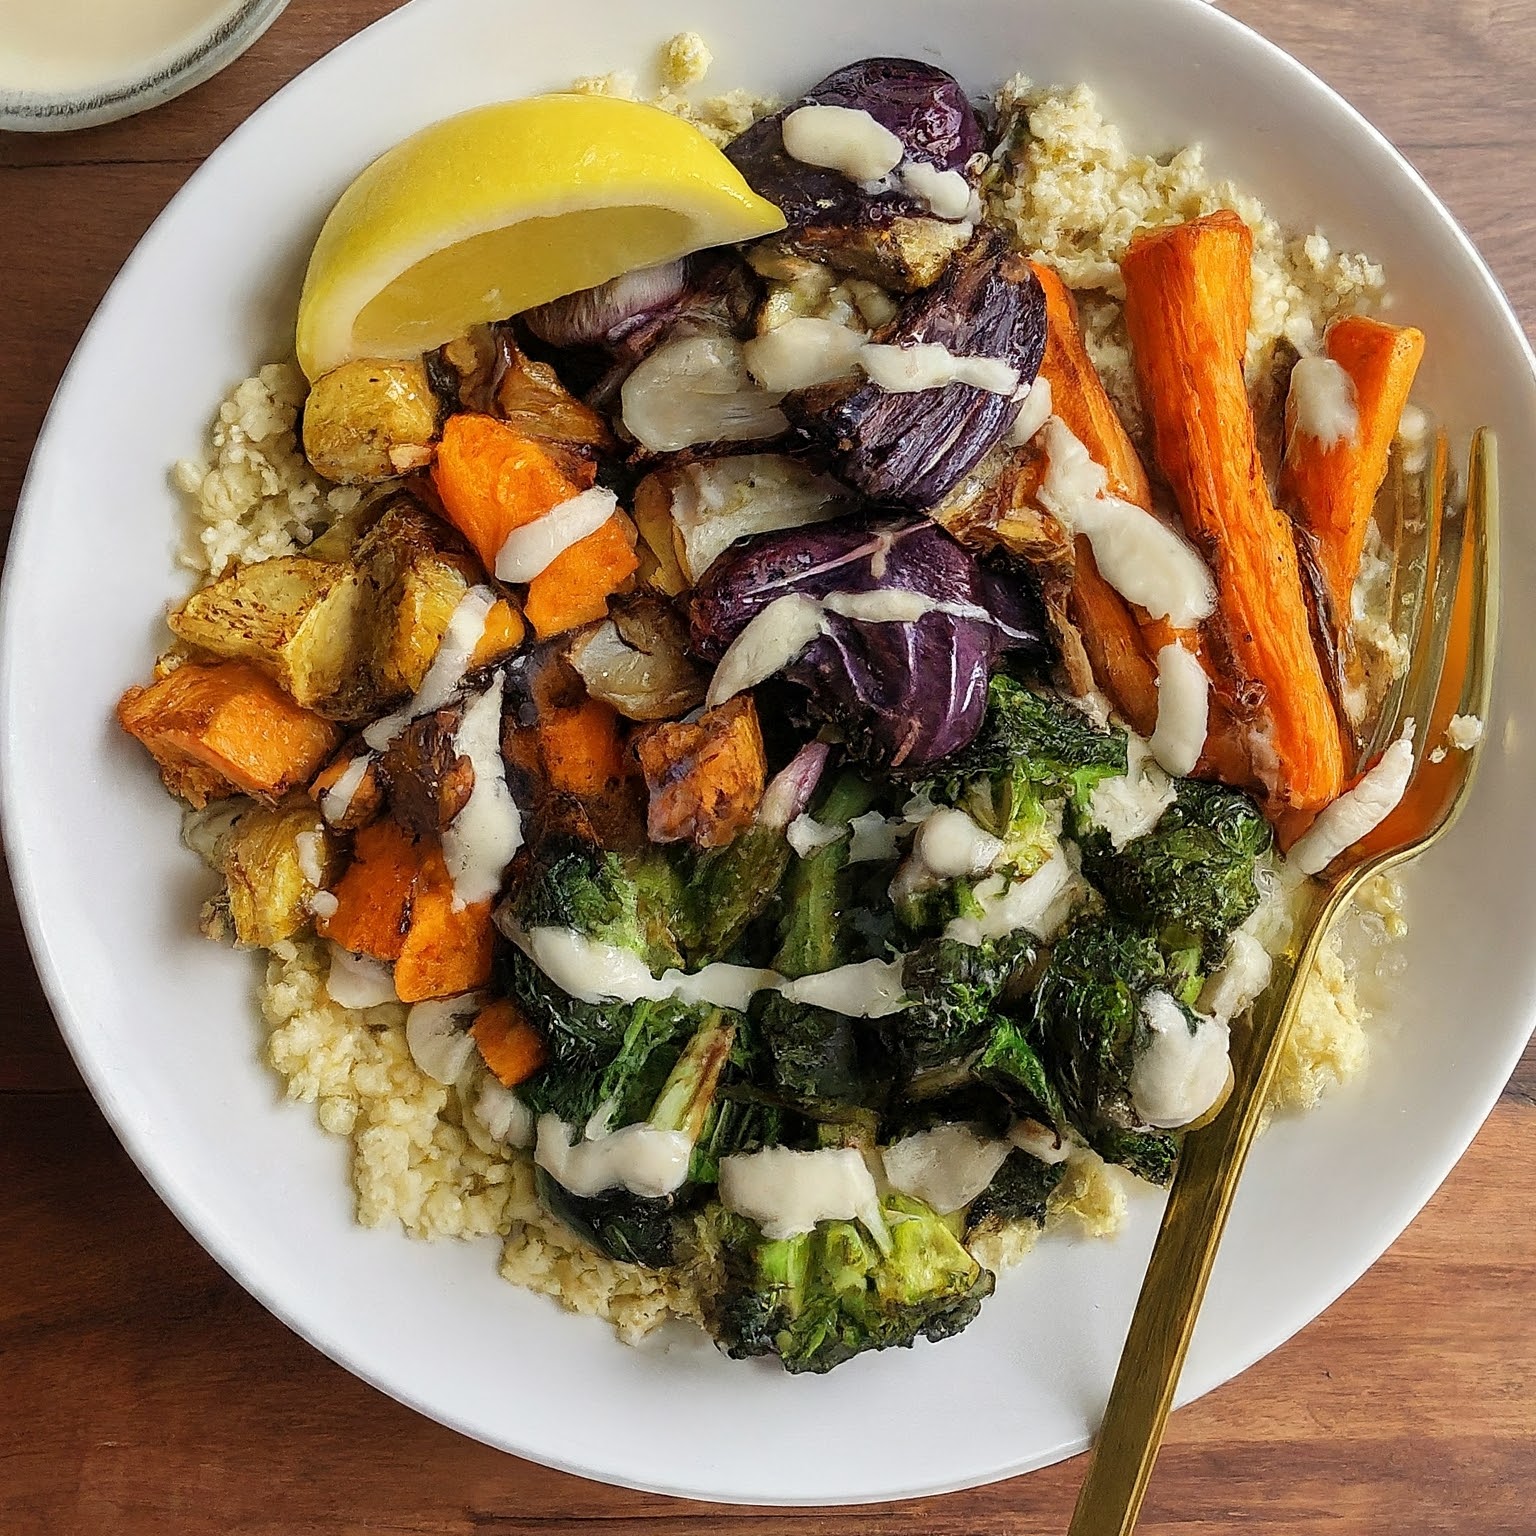 Savory Millet Veggie Bowl with colourful roasted vegetables, herbs, lemon tahini dressing, and a lemon wedge.